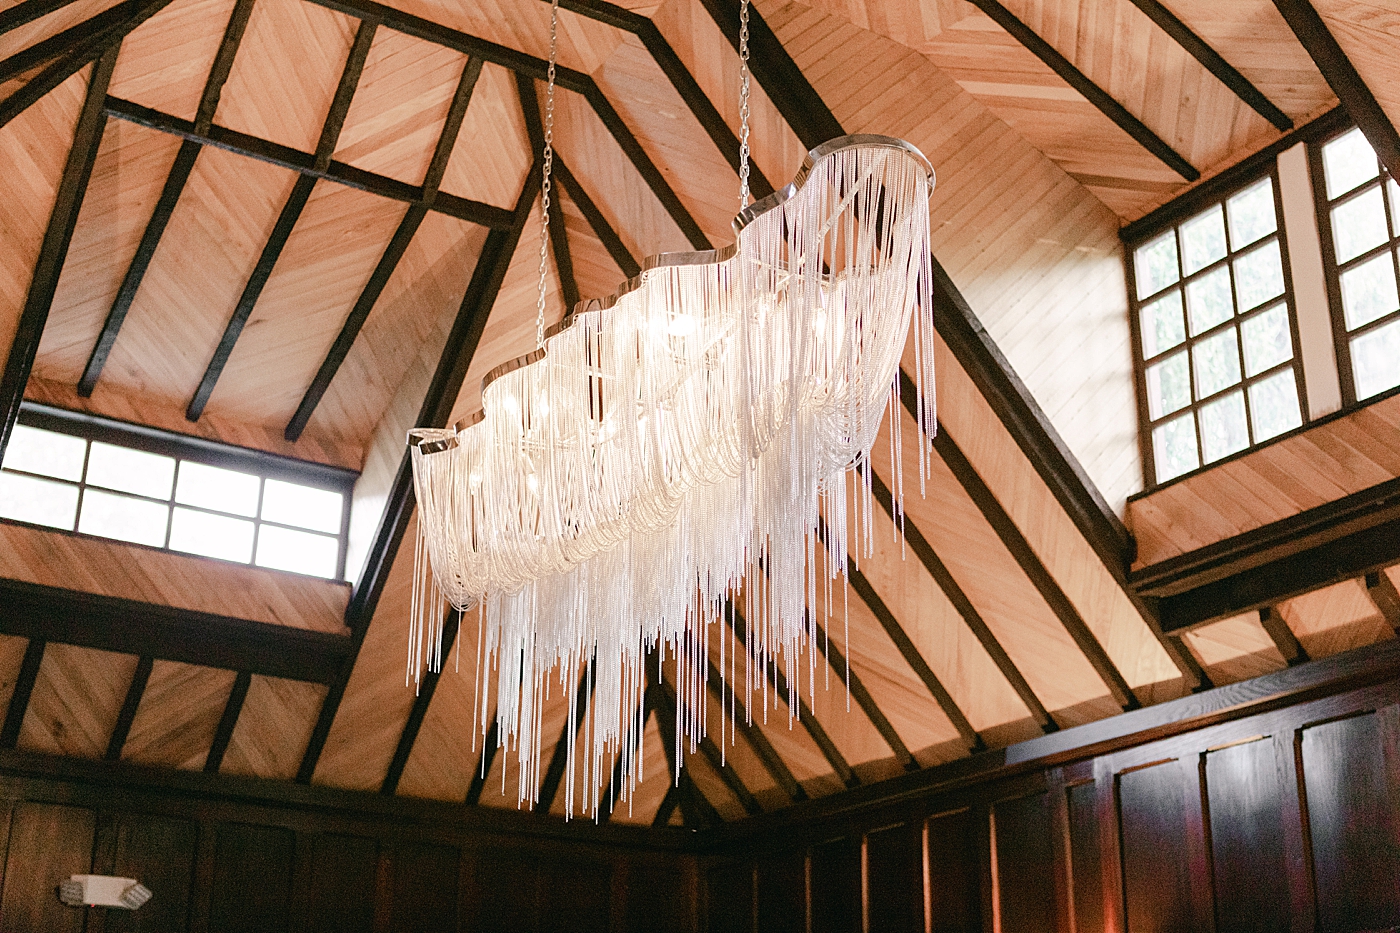 Chandelier at wedding venue during Hotel du Village Wedding | Image by Hope Helmuth Photography